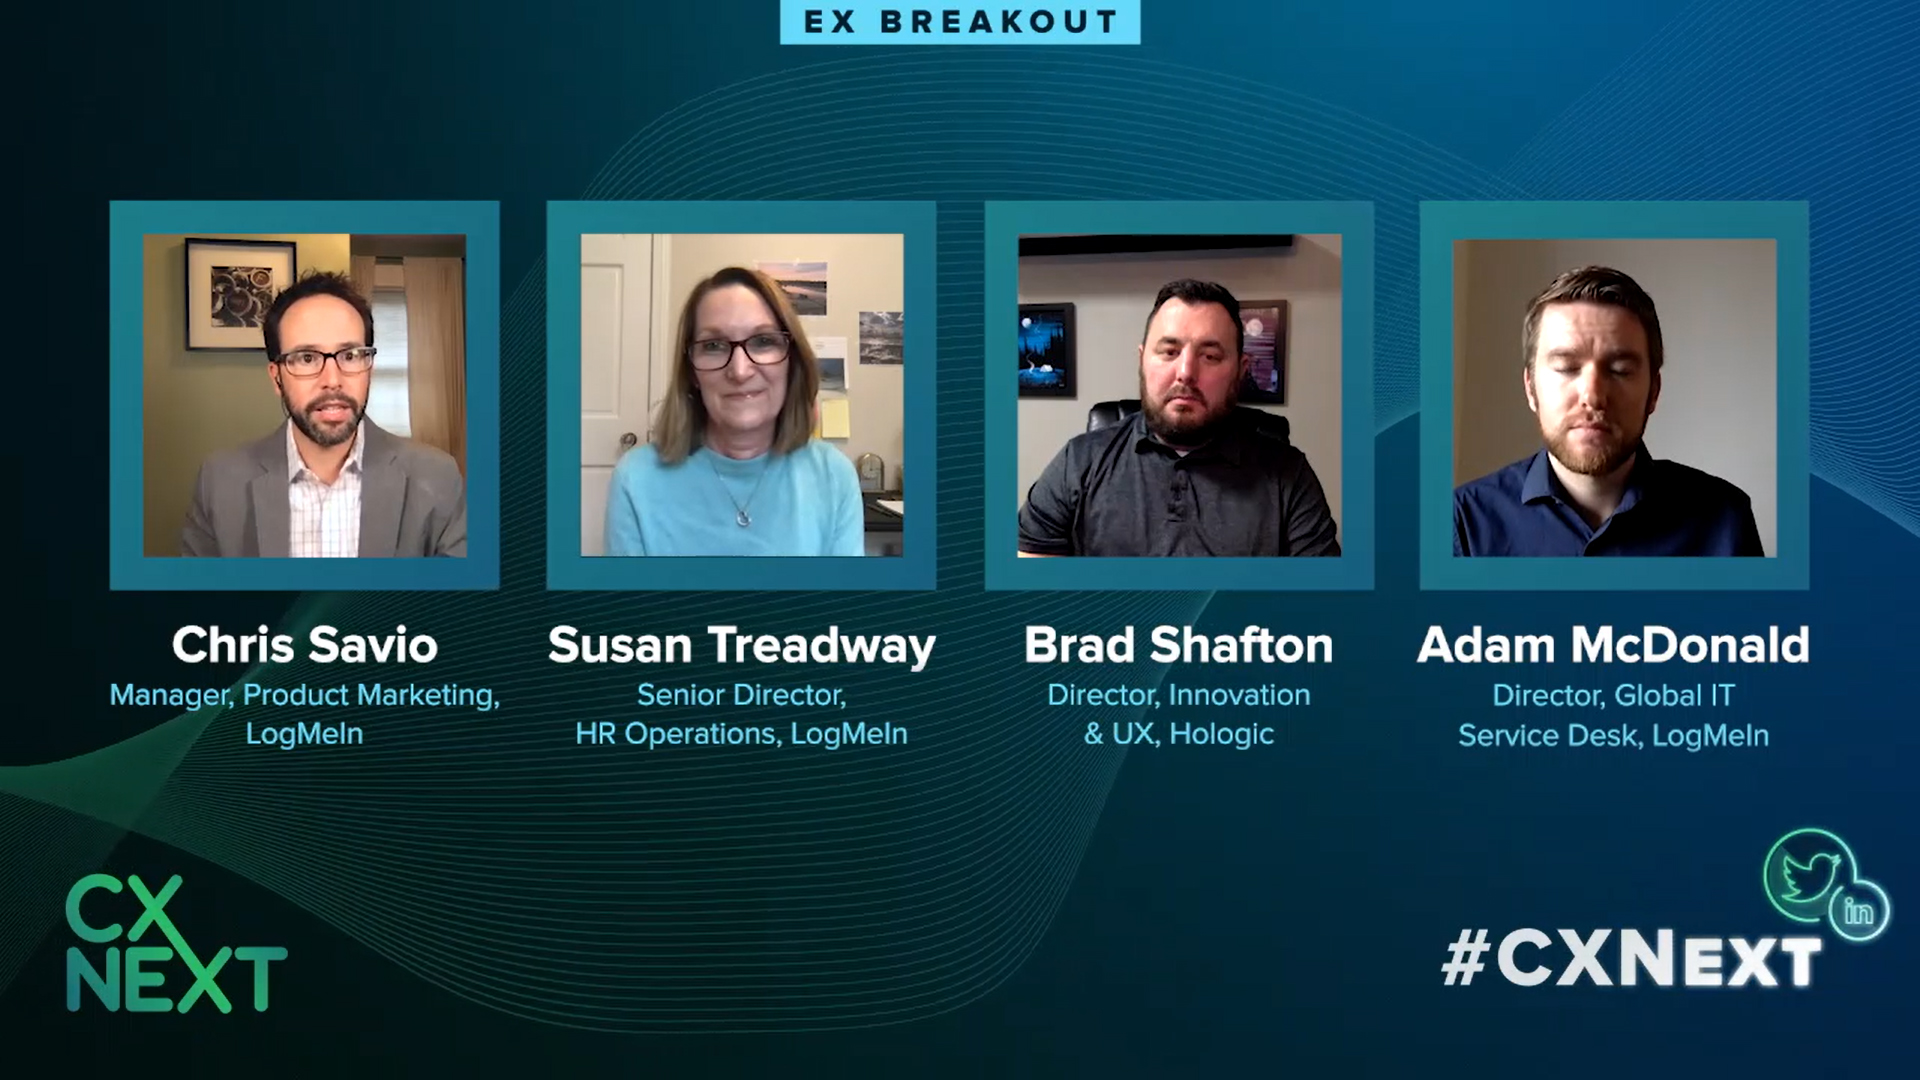 Ex Breakout panel layout of 4 speakers